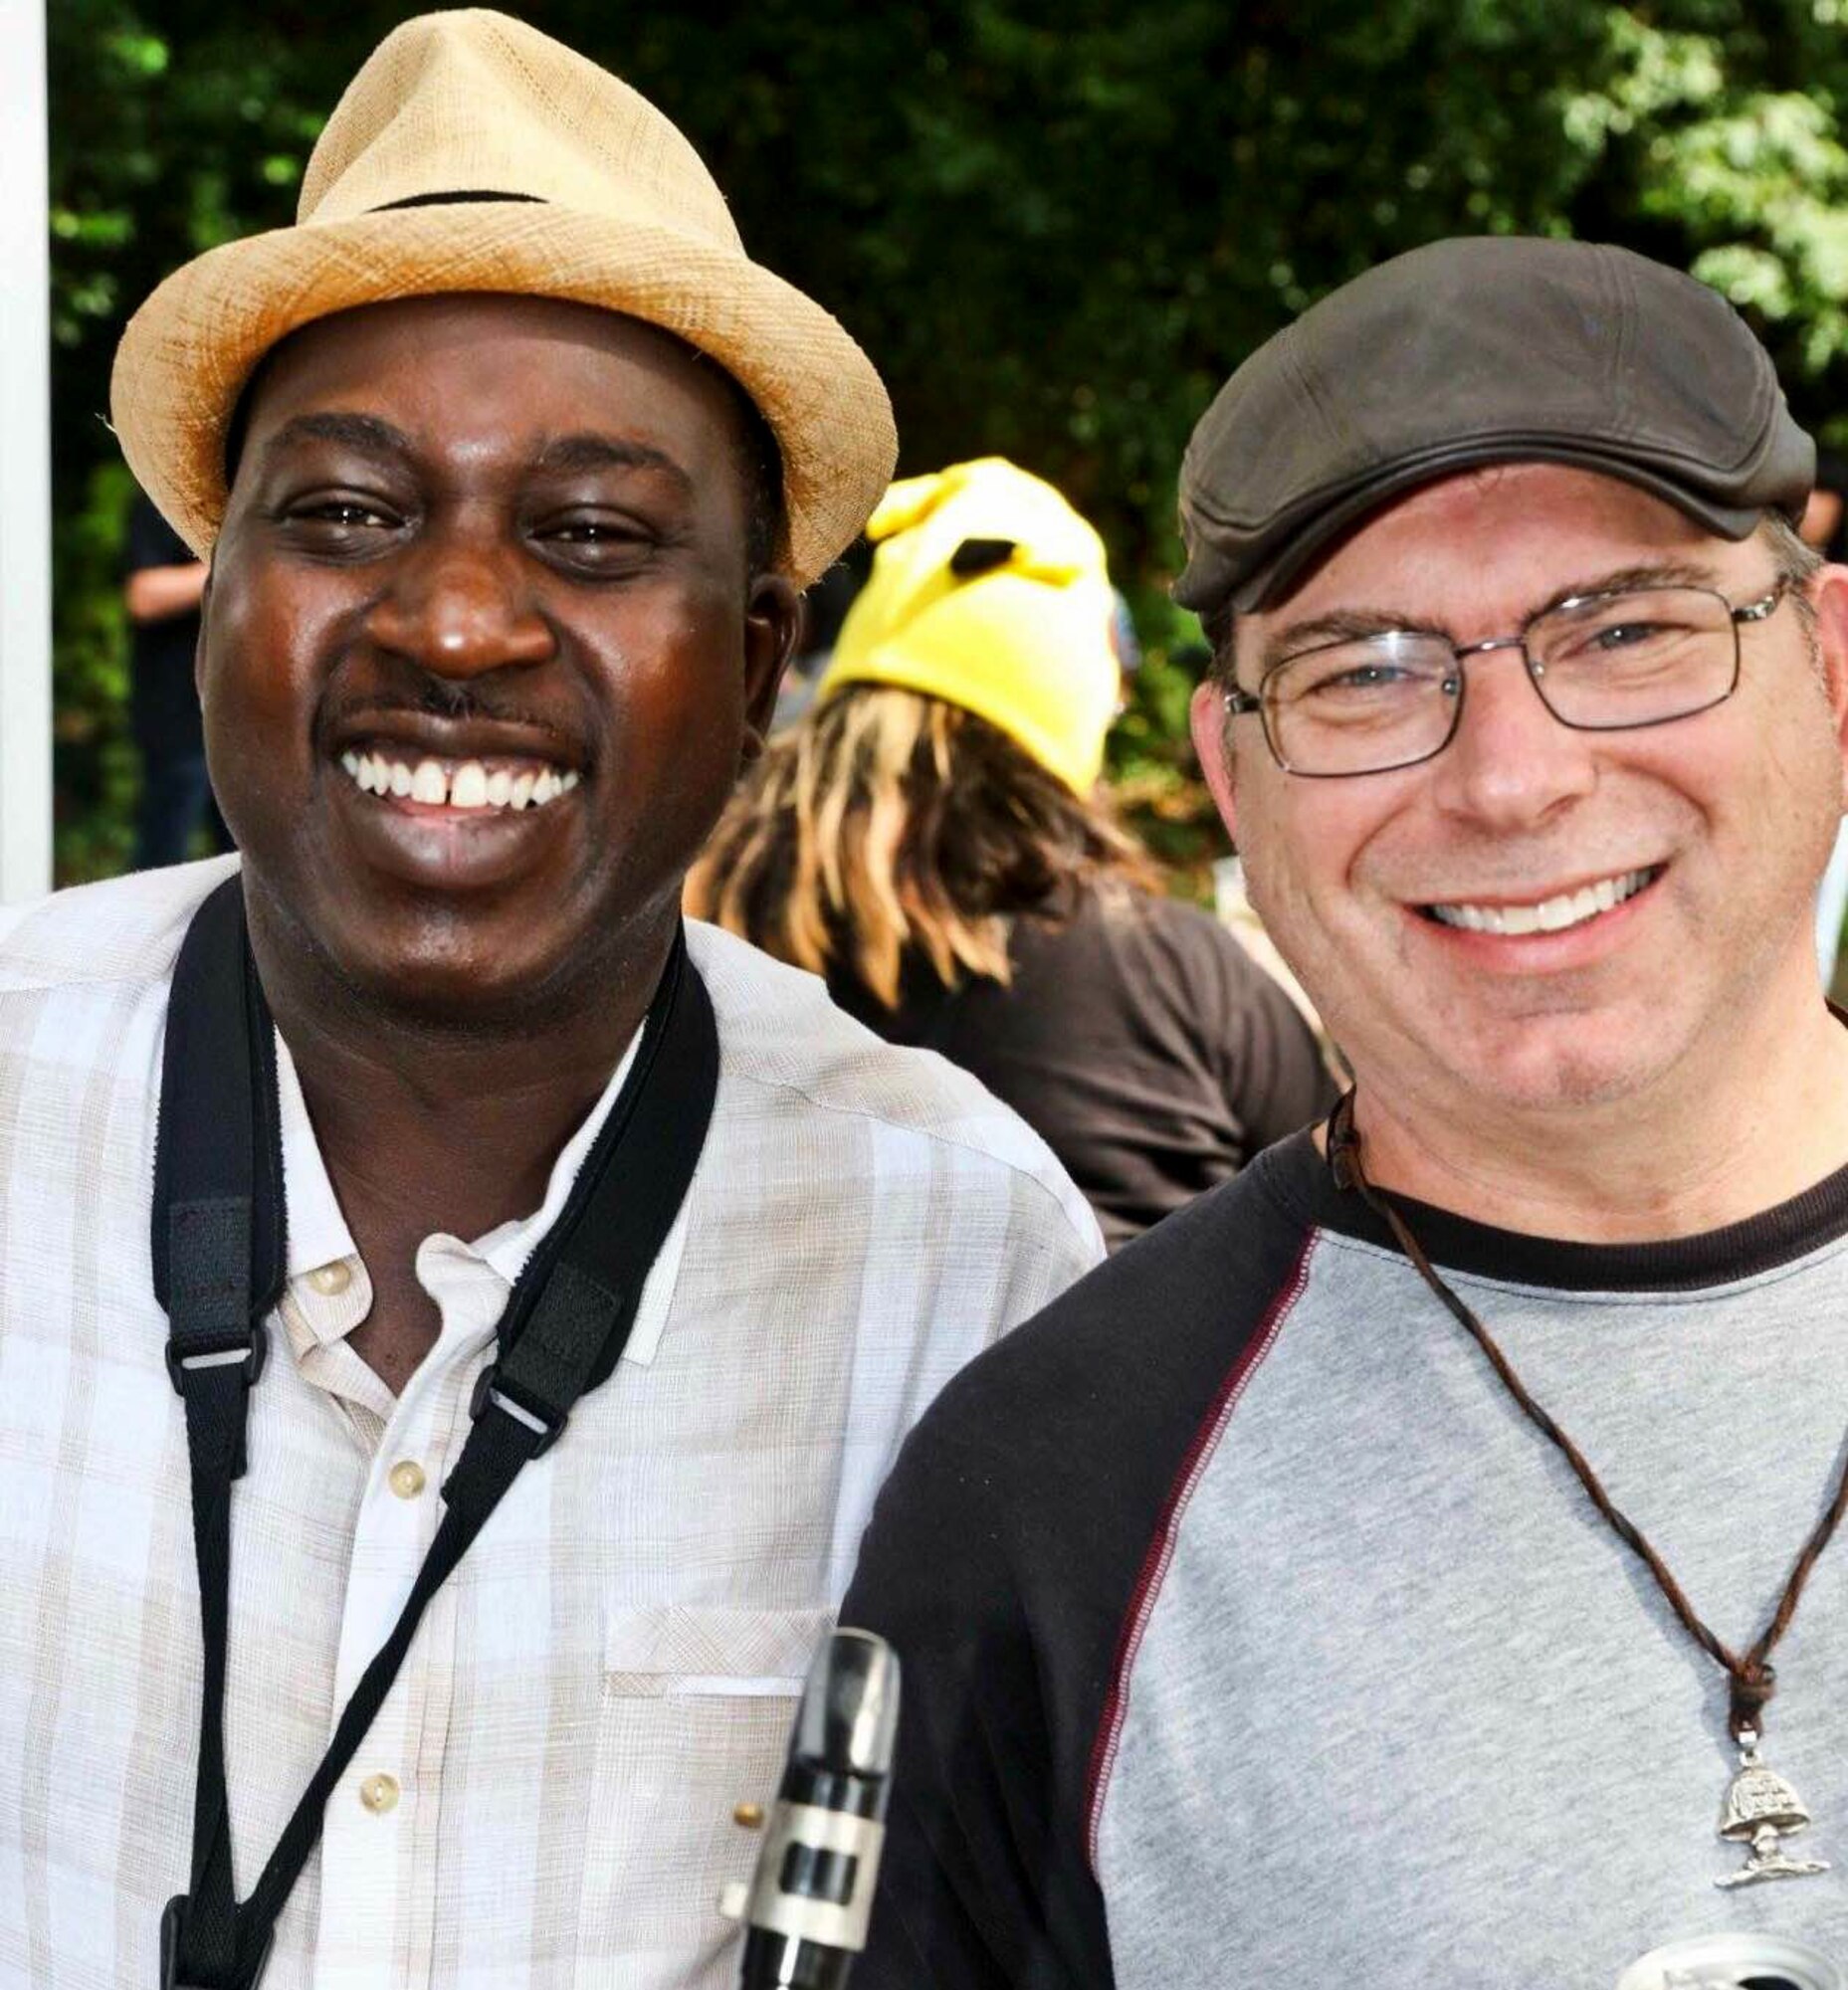 Lt. Col. Christopher Afful, left, and Chief Master Sgt. Dan Kelly both work at Headquarters Air Force Reserve Command at Robins Air Force Base, Georgia, and are both active in the Middle Georgia music scene. They play together in the band Barrelhouse. (Courtesy photo)